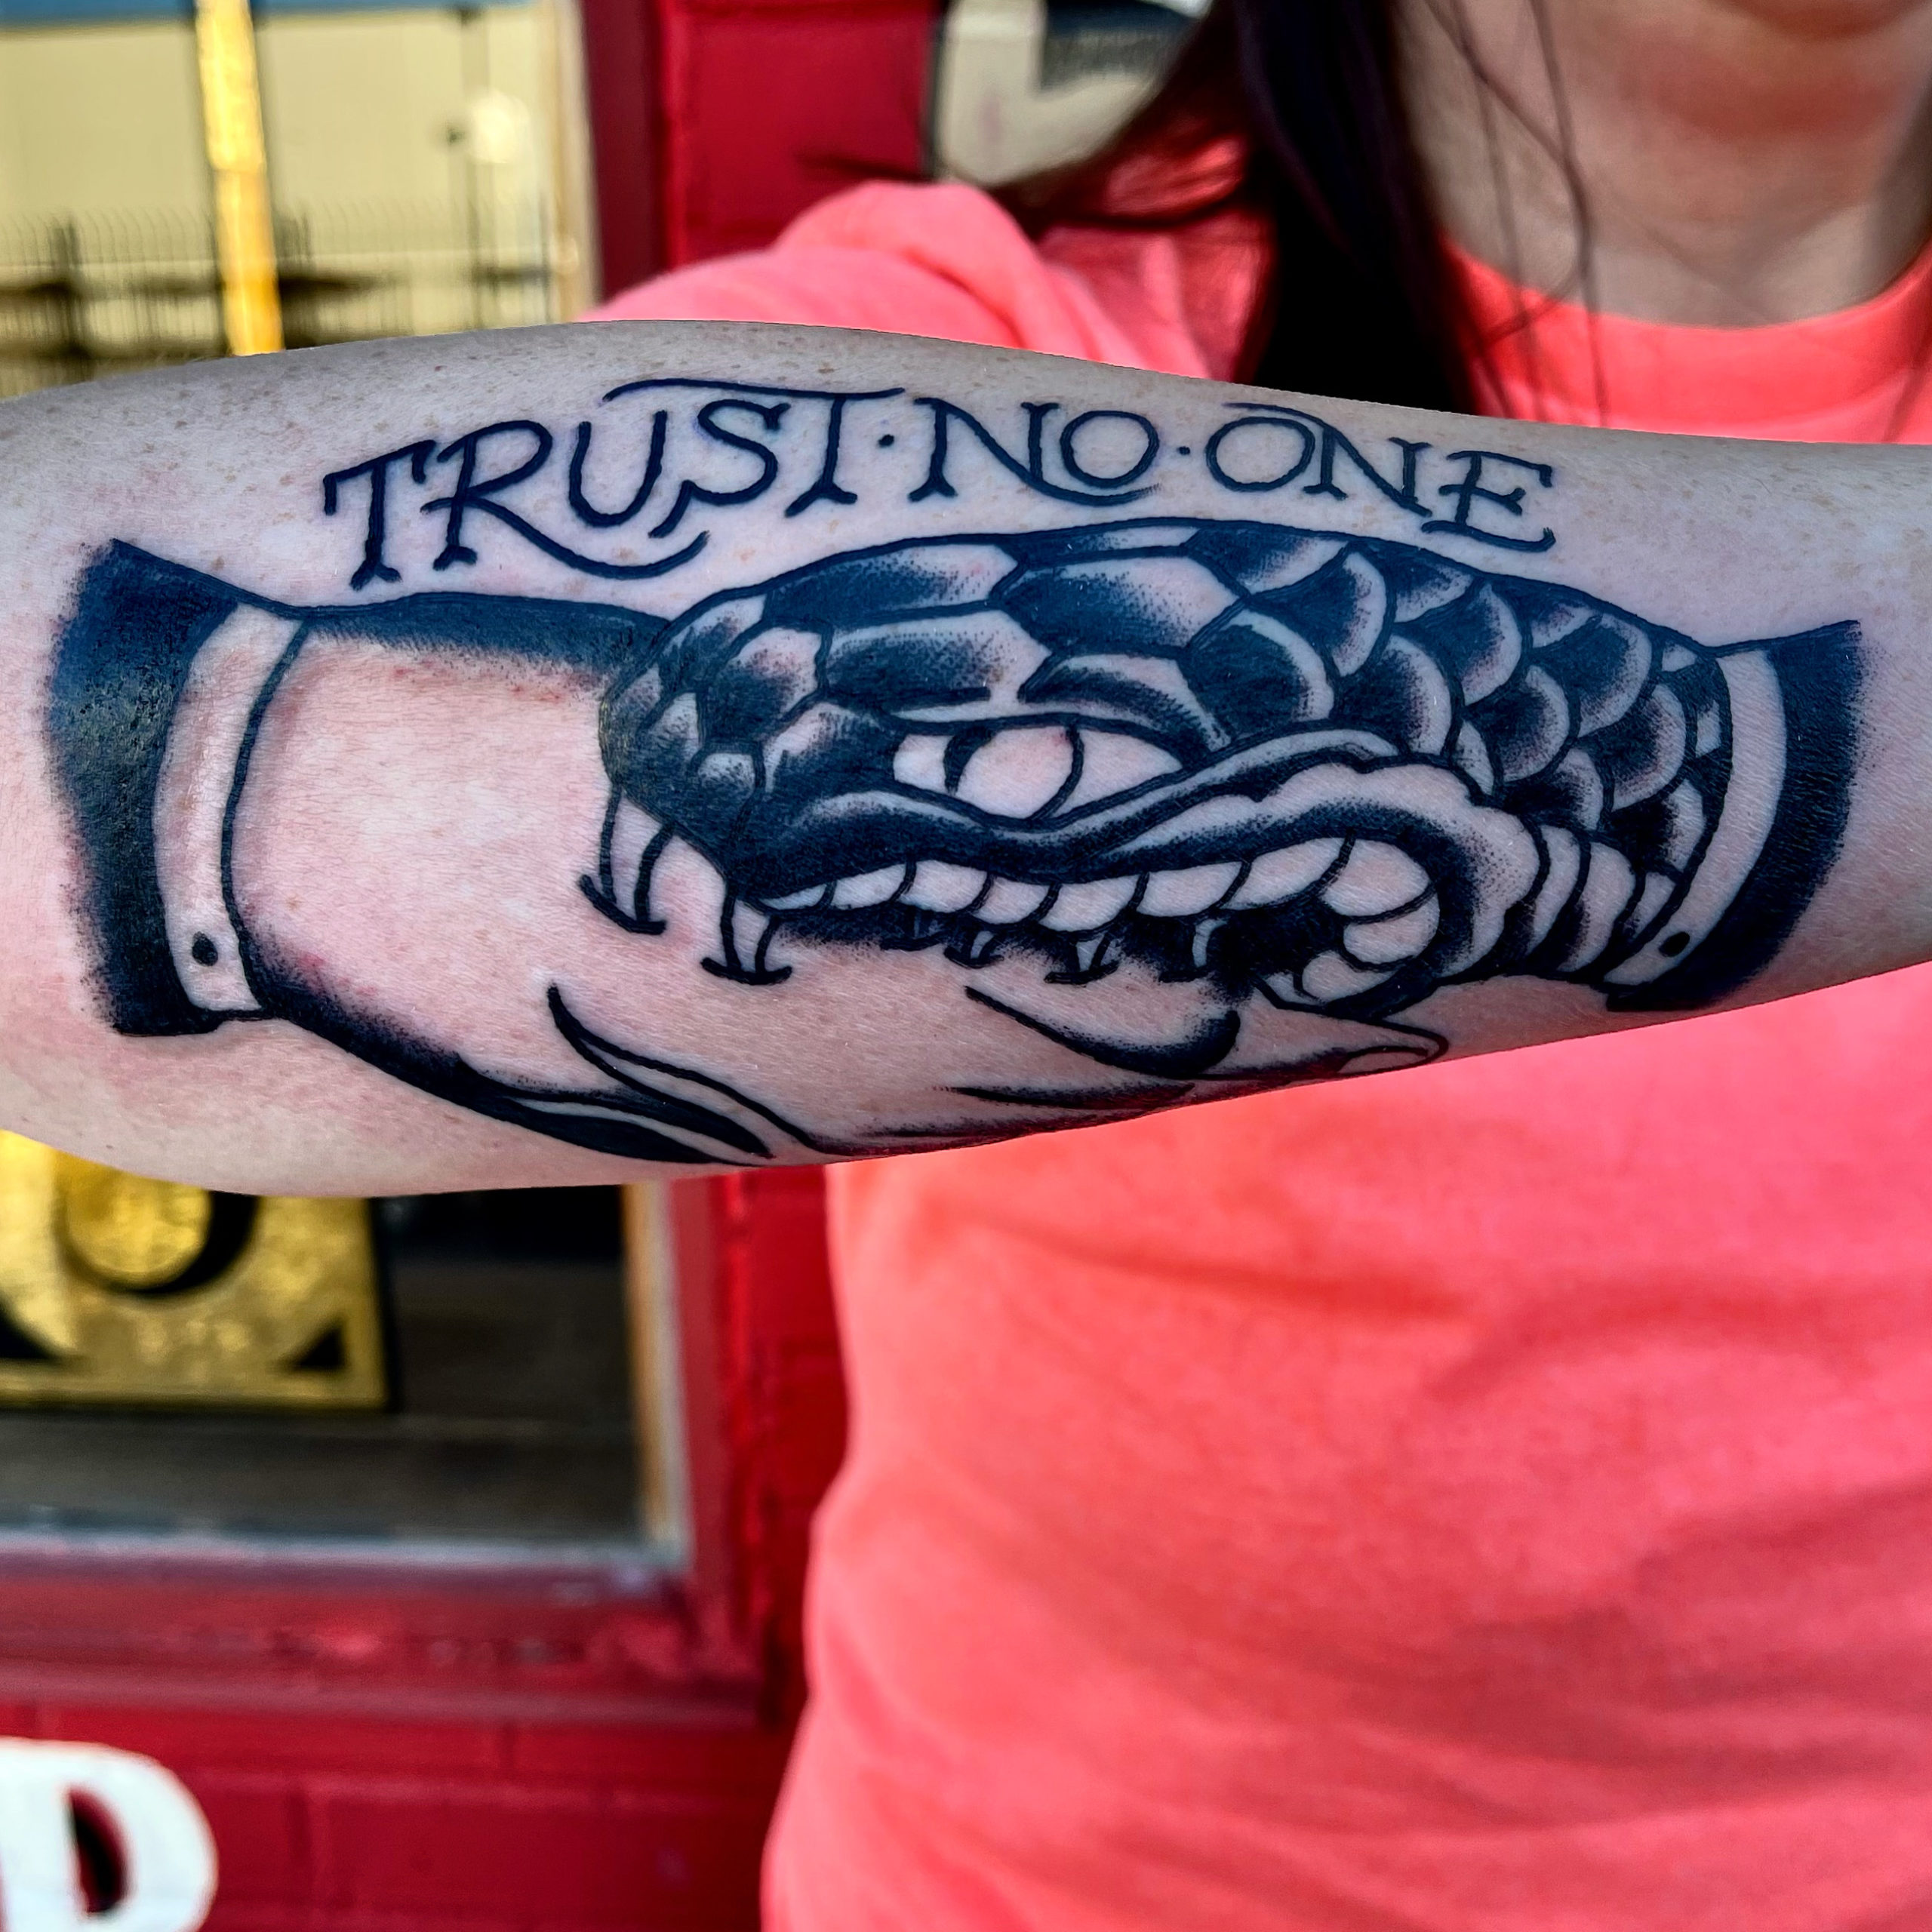 tattoo of a snake from professional tattoo artist in Dallas